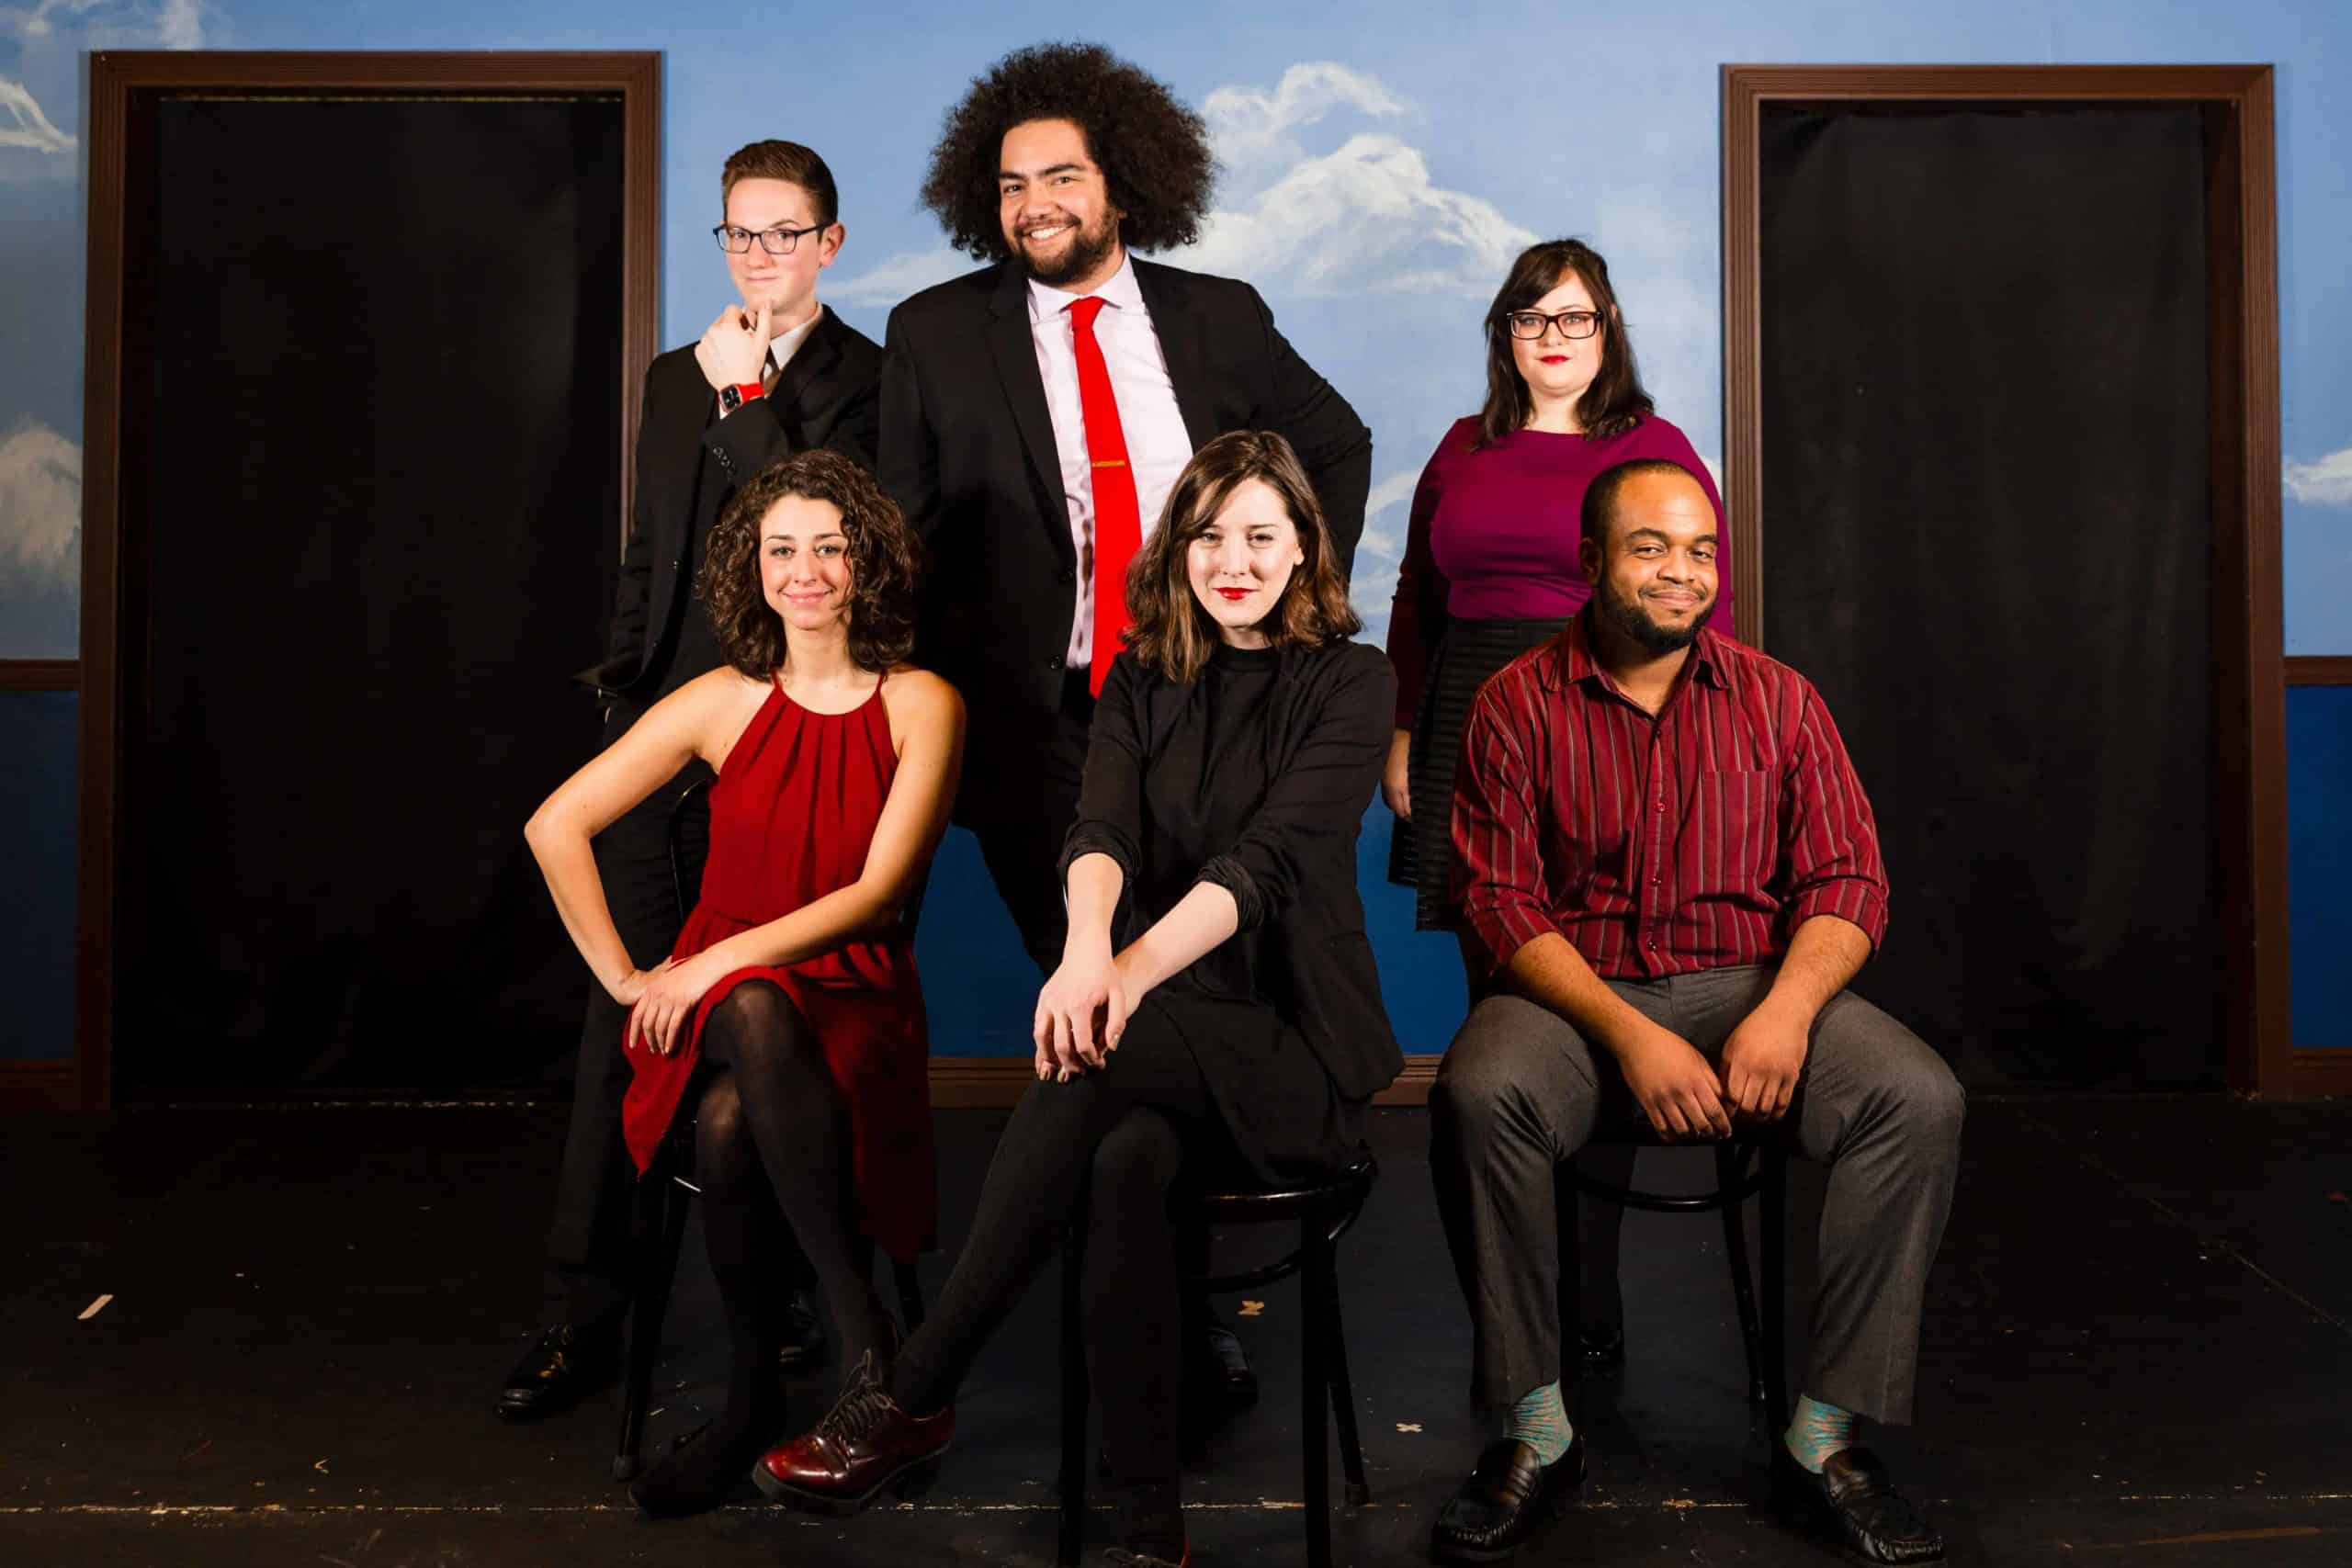 Revered comedy troupe Second City coming to the FMU PAC